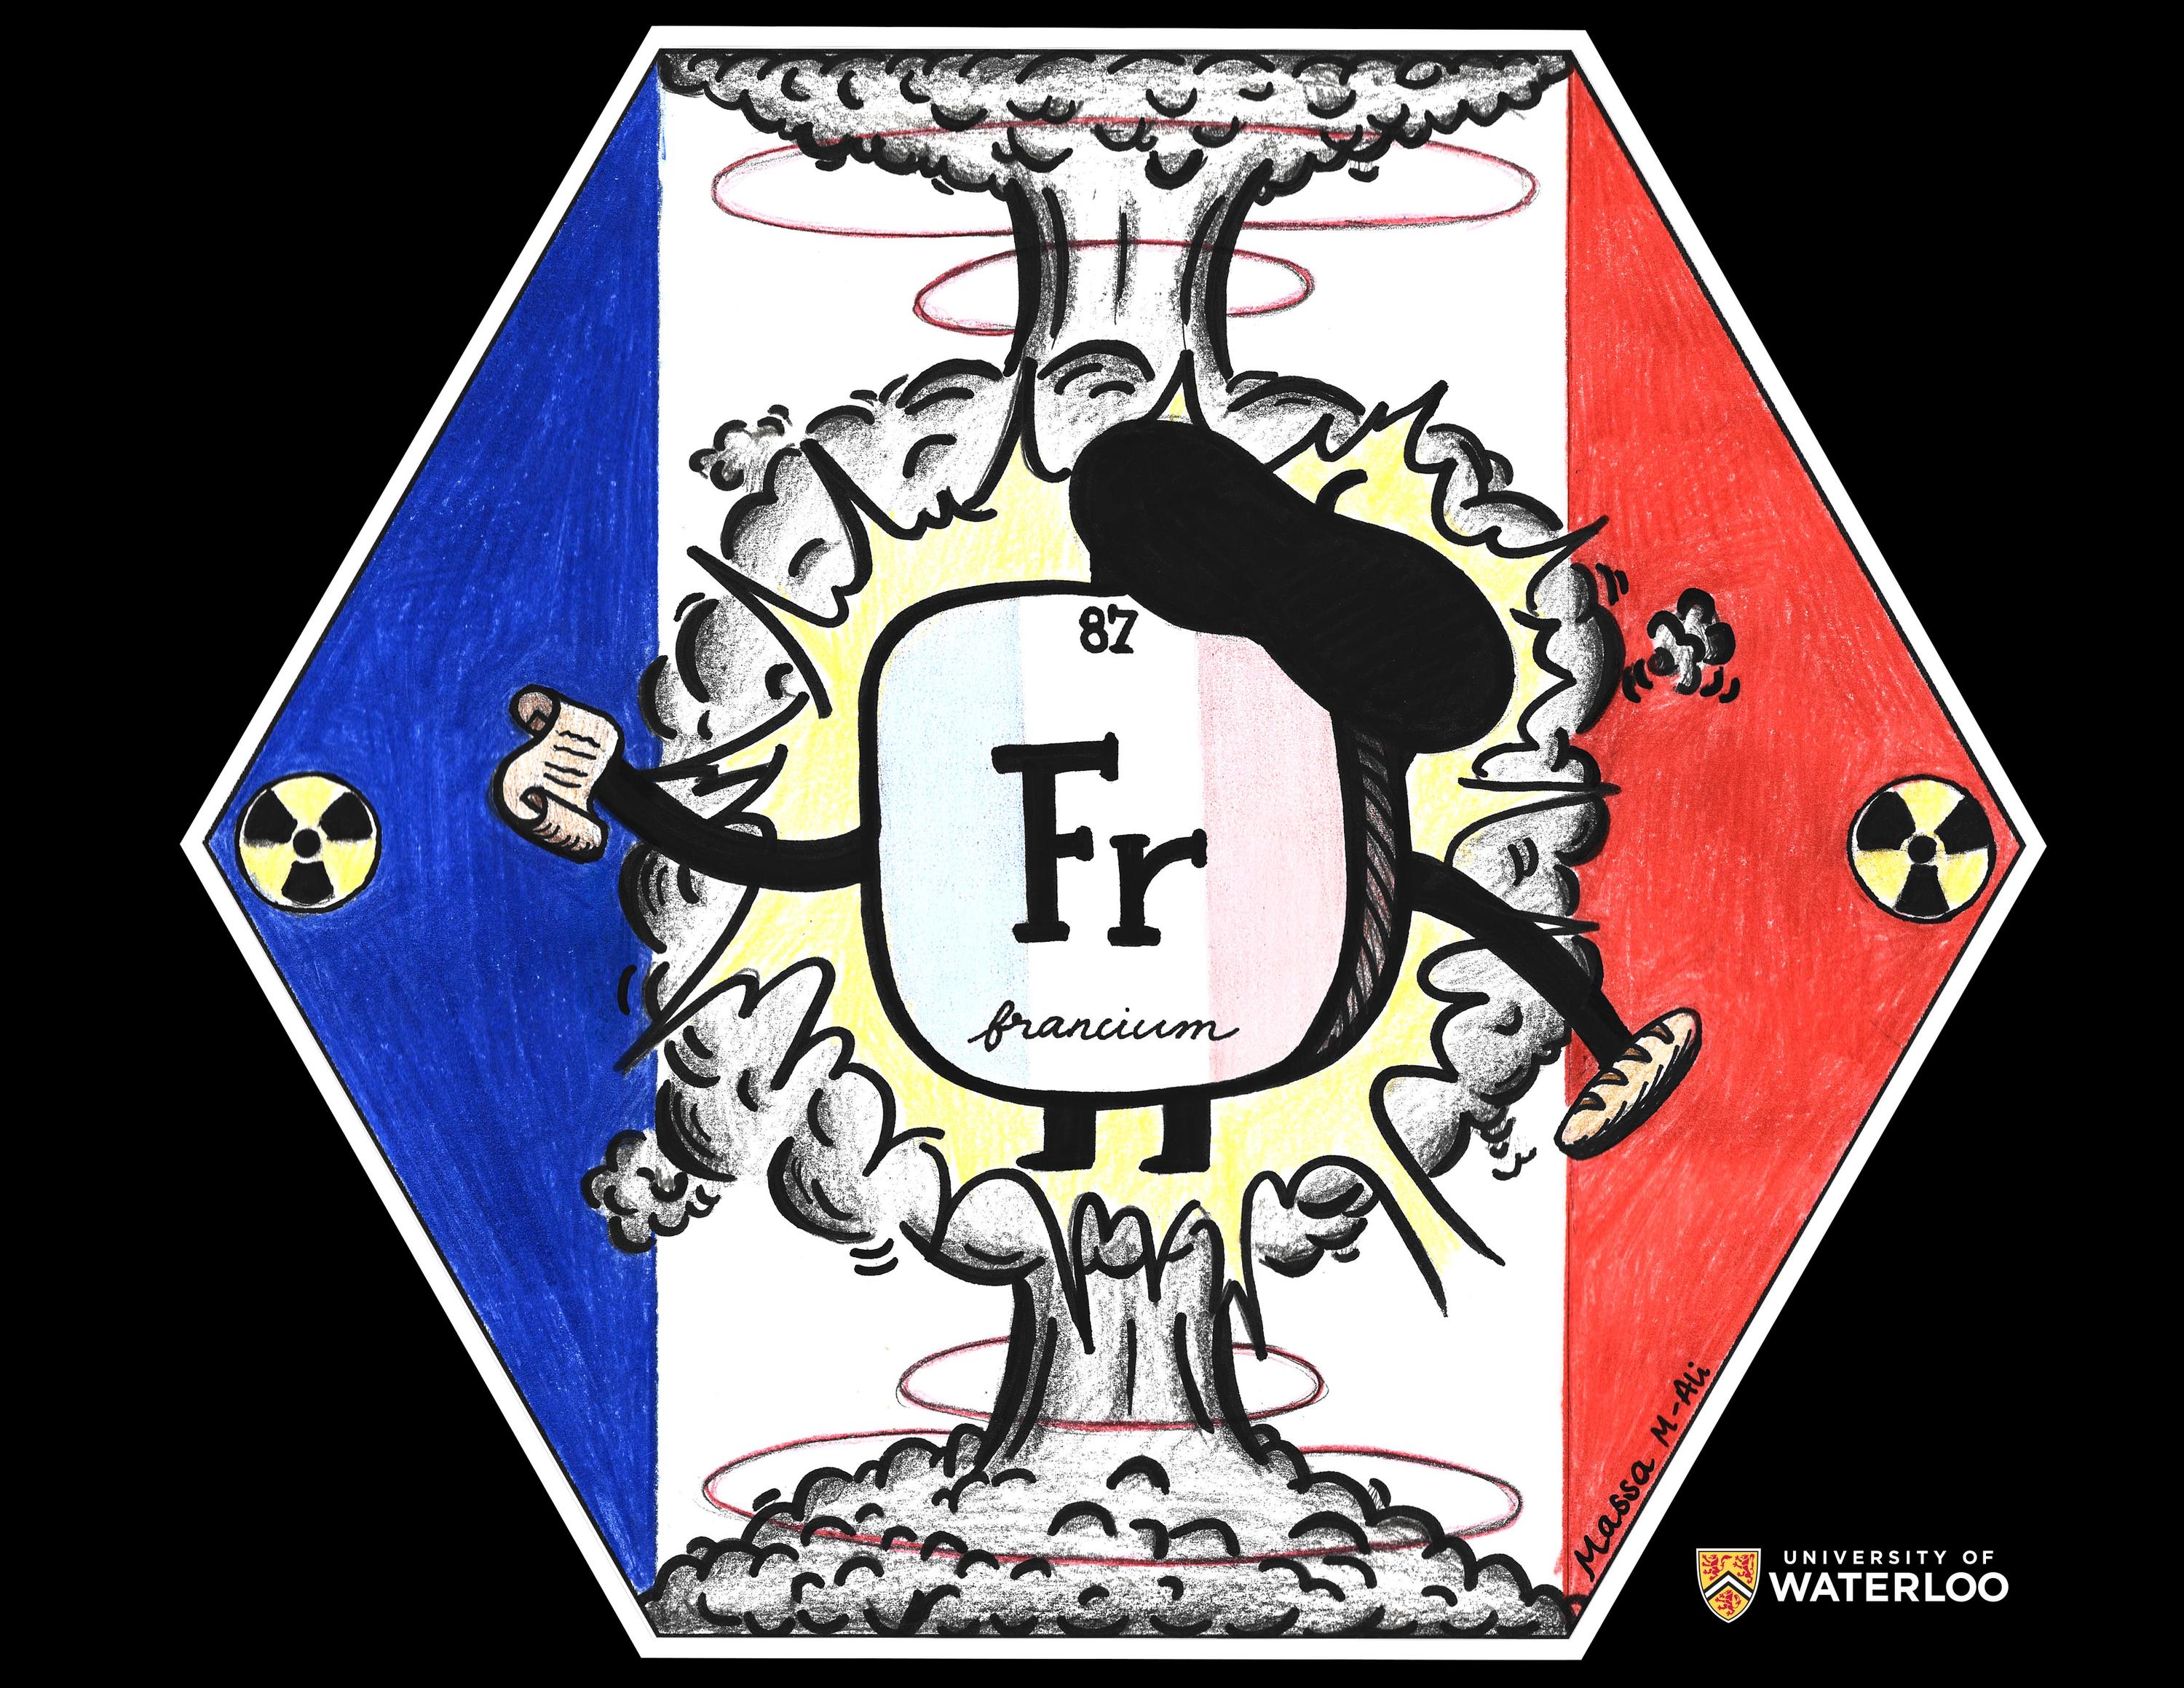 Ink and coloured pencil on French flag (blue-white-red) background . A periodic table tile with the chemical symbol “Fr” appears centre. The tile has hands and feet and is also coloured like the French flag. It’s wearing a beret and holding a baguette in one hand and a scroll in the other. To the right and left are two small radioactive symbols. Two nuclear explosions from above and below are meeting together in the middle.